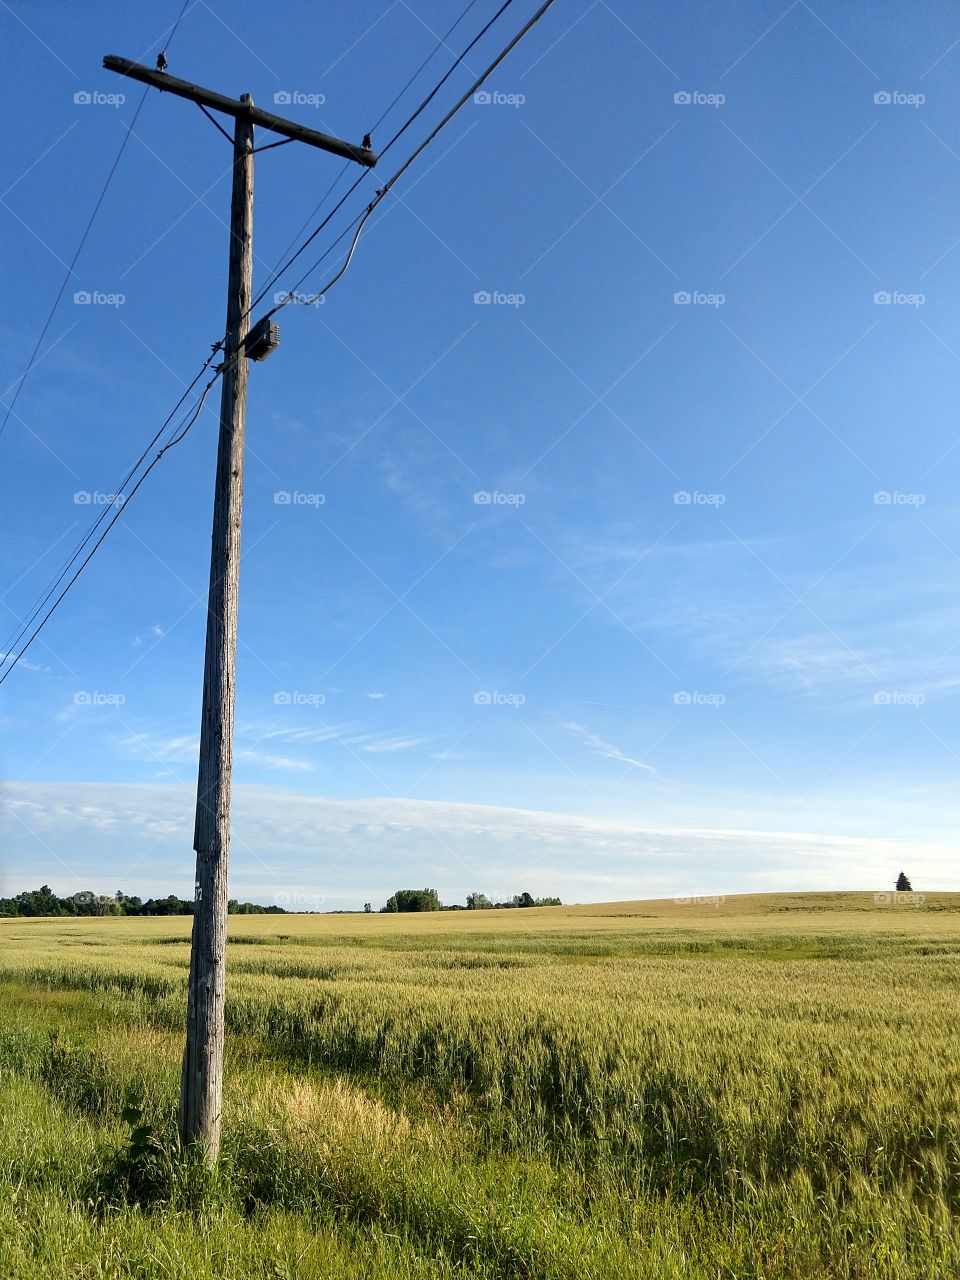 telephone pole by a wheat field